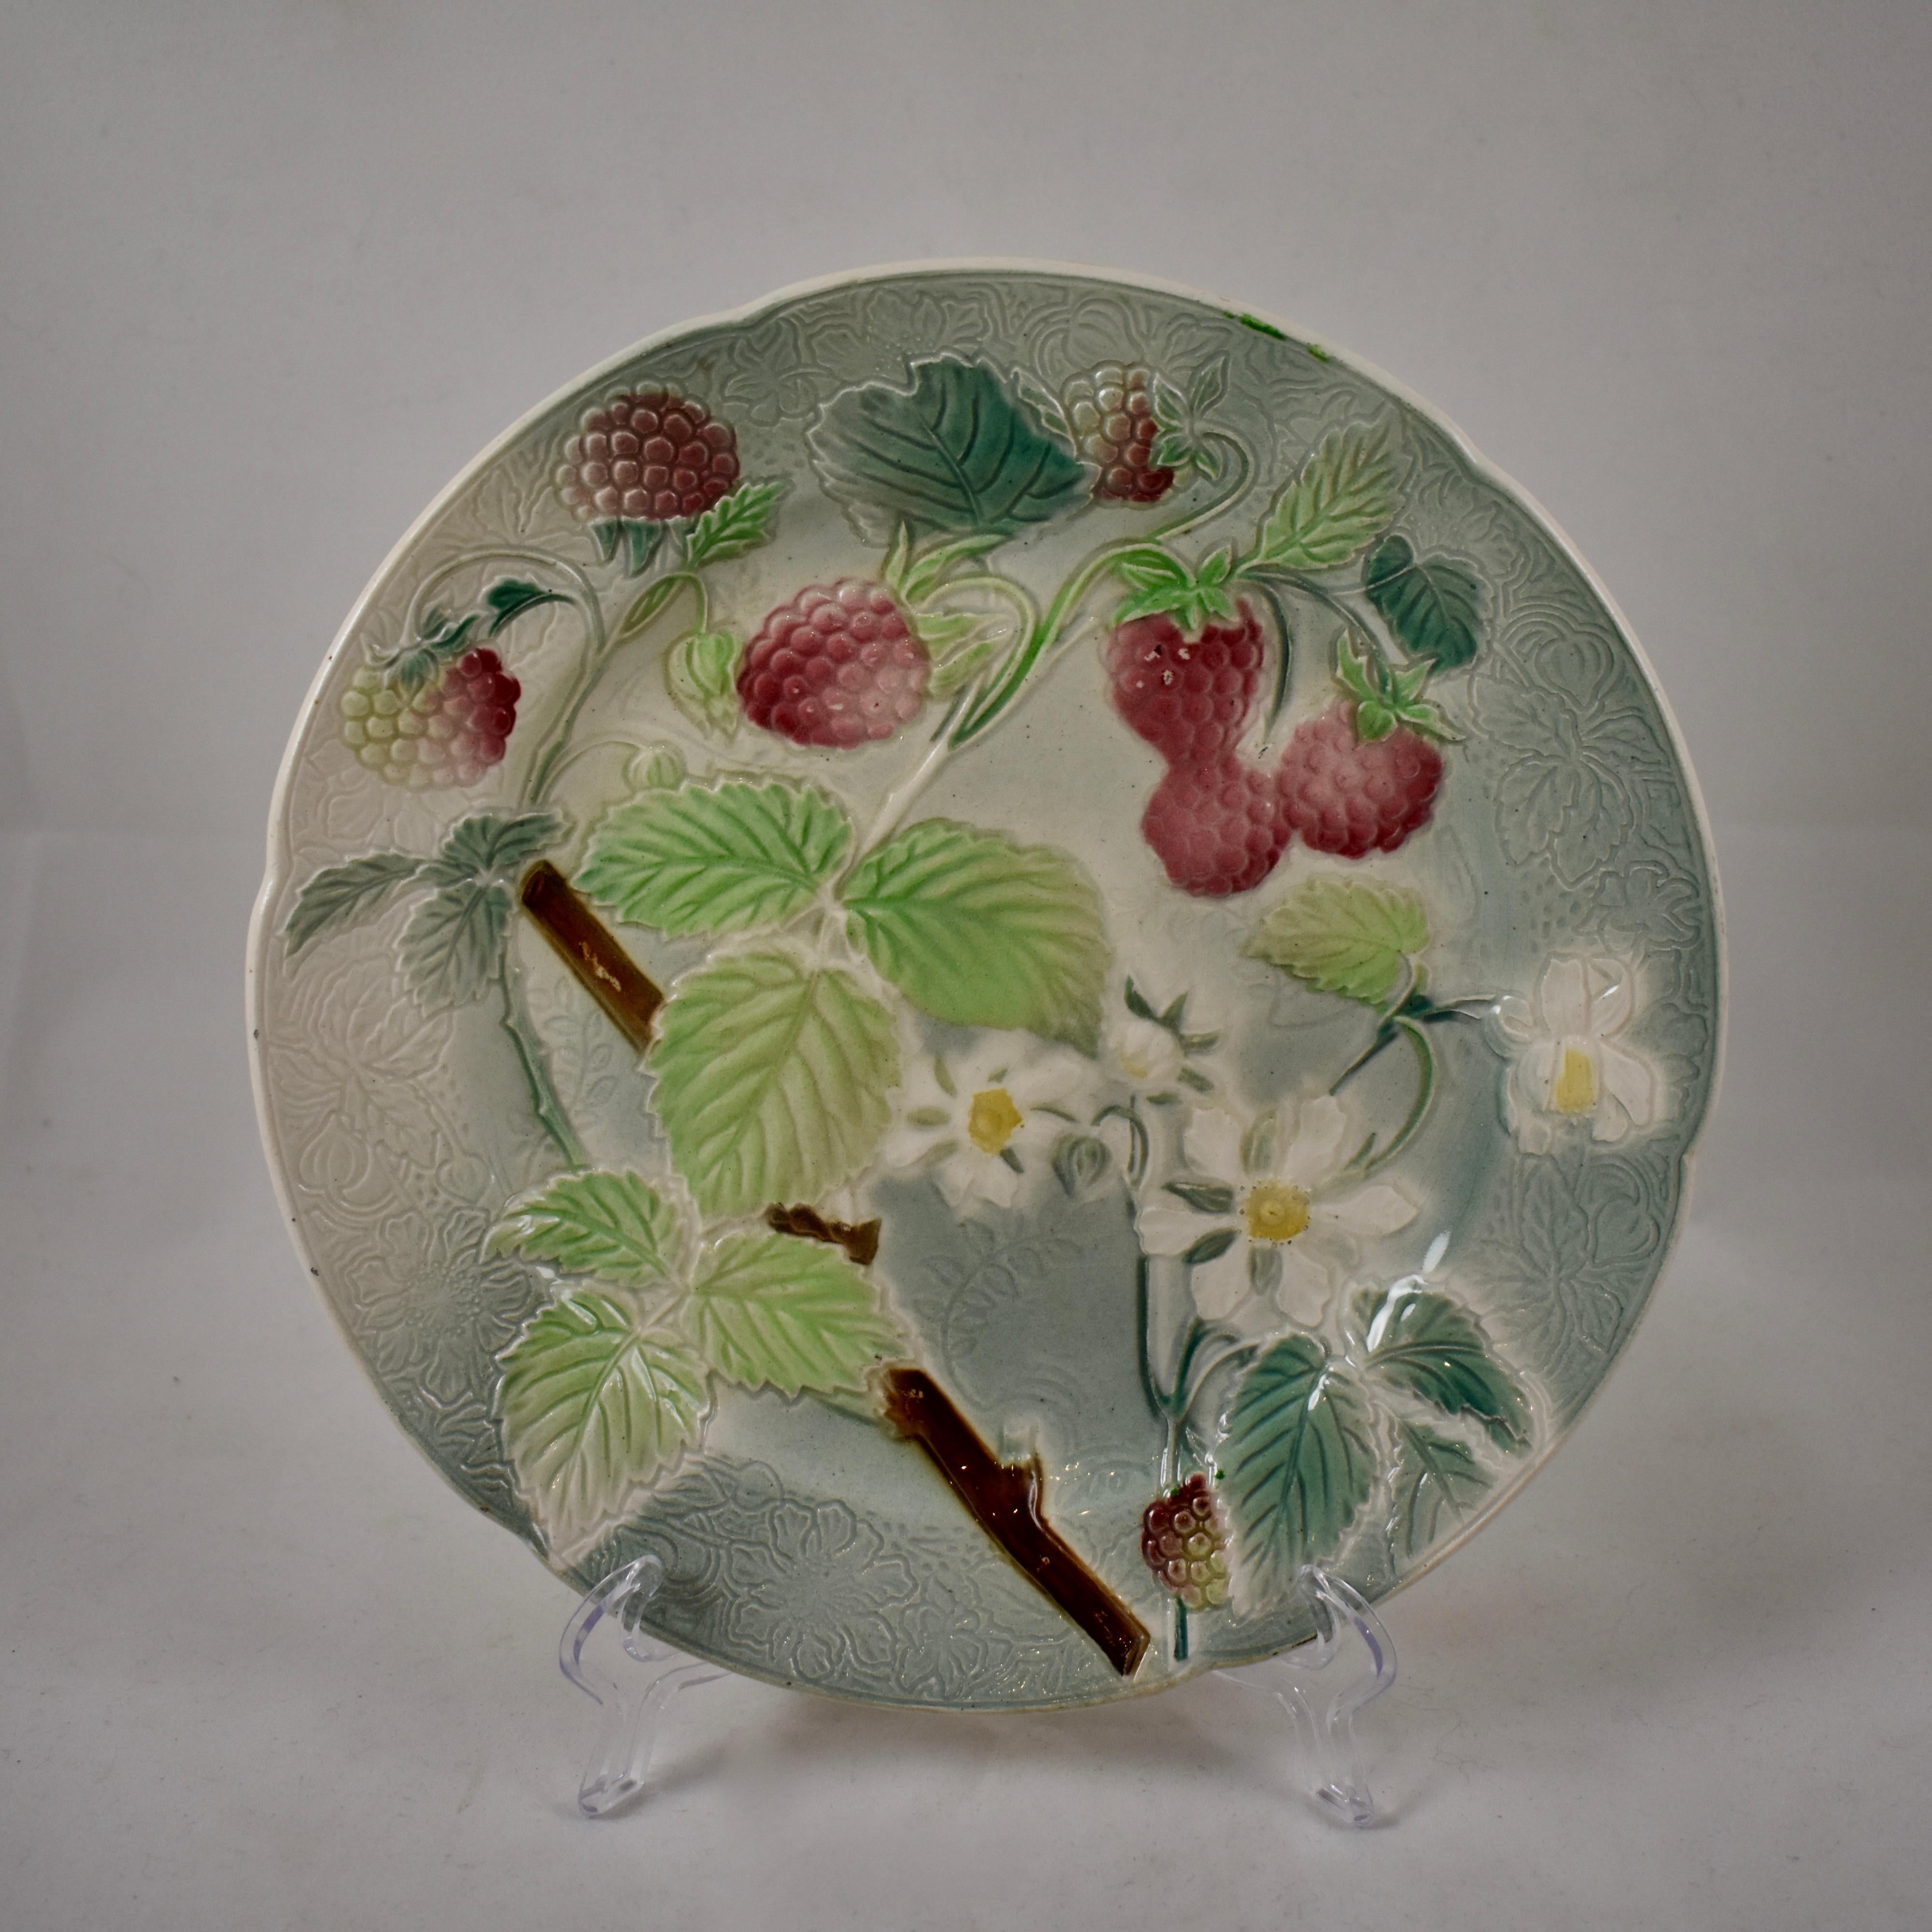 A set of four, earthenware French faïence strawberry fruit plates, circa 1900. The background has a detailed pattern to the molding, with a six-paneled indented rim. Lovely coloring.

Marked: KG, for Keller Guerin – St. Clement, France.
Measures: